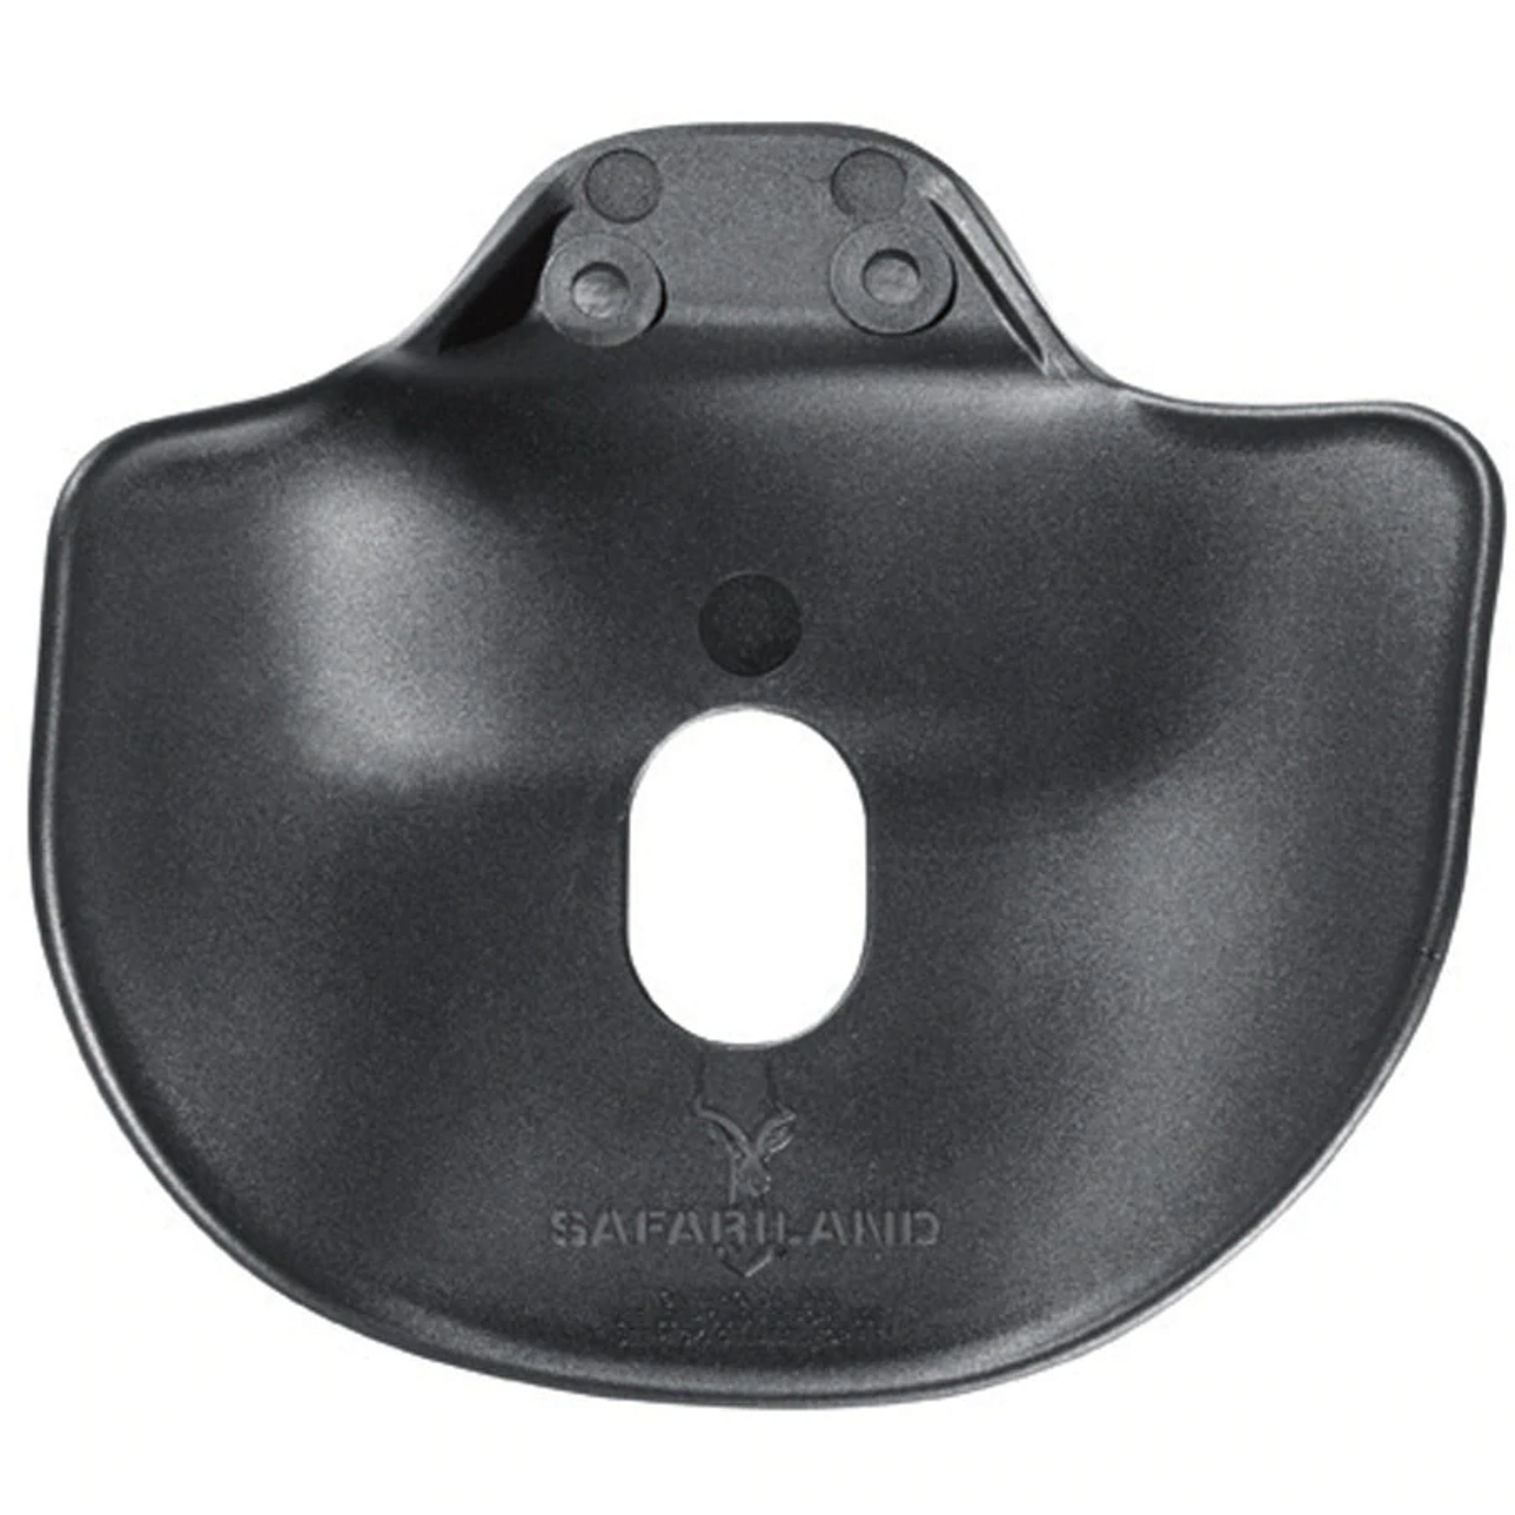 Model 568bl Injection Molded Cantable Paddle For Safariland 3-hole Pattern Holsters